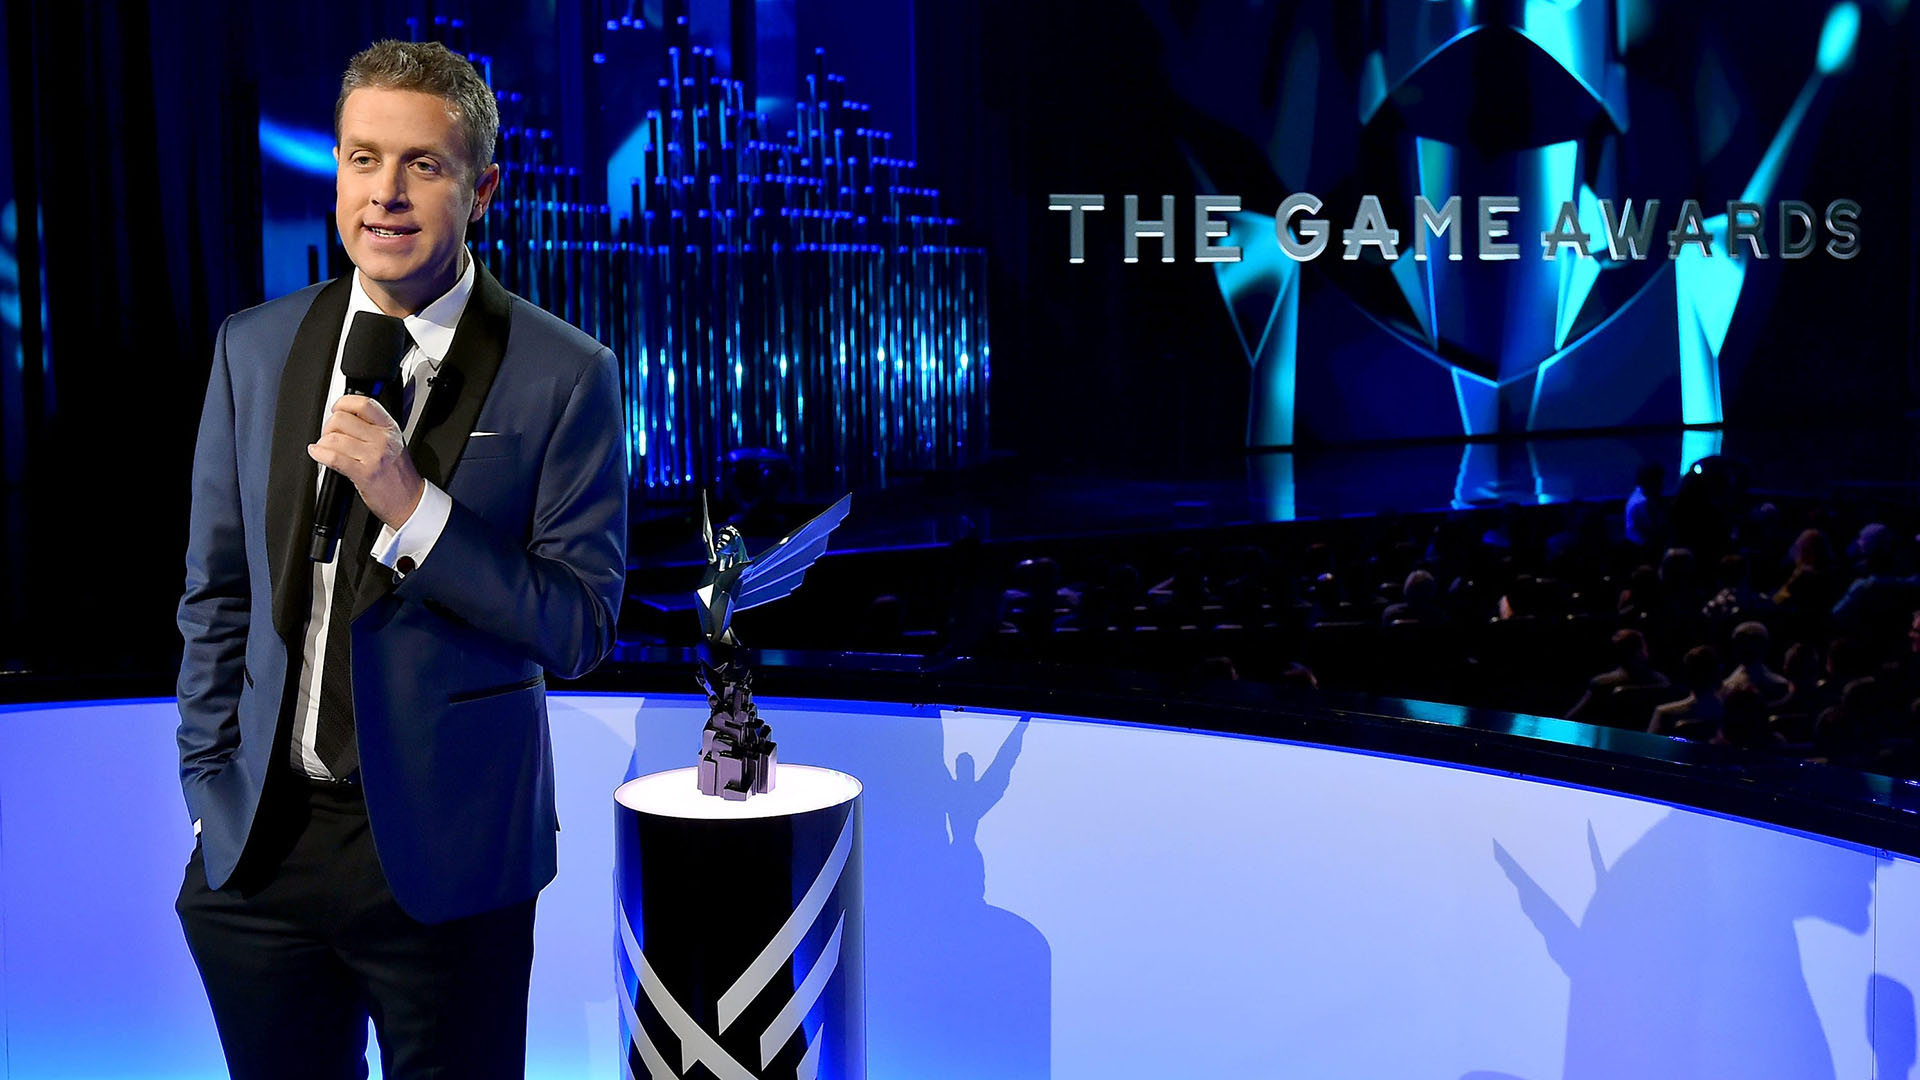 the ultimate game awards